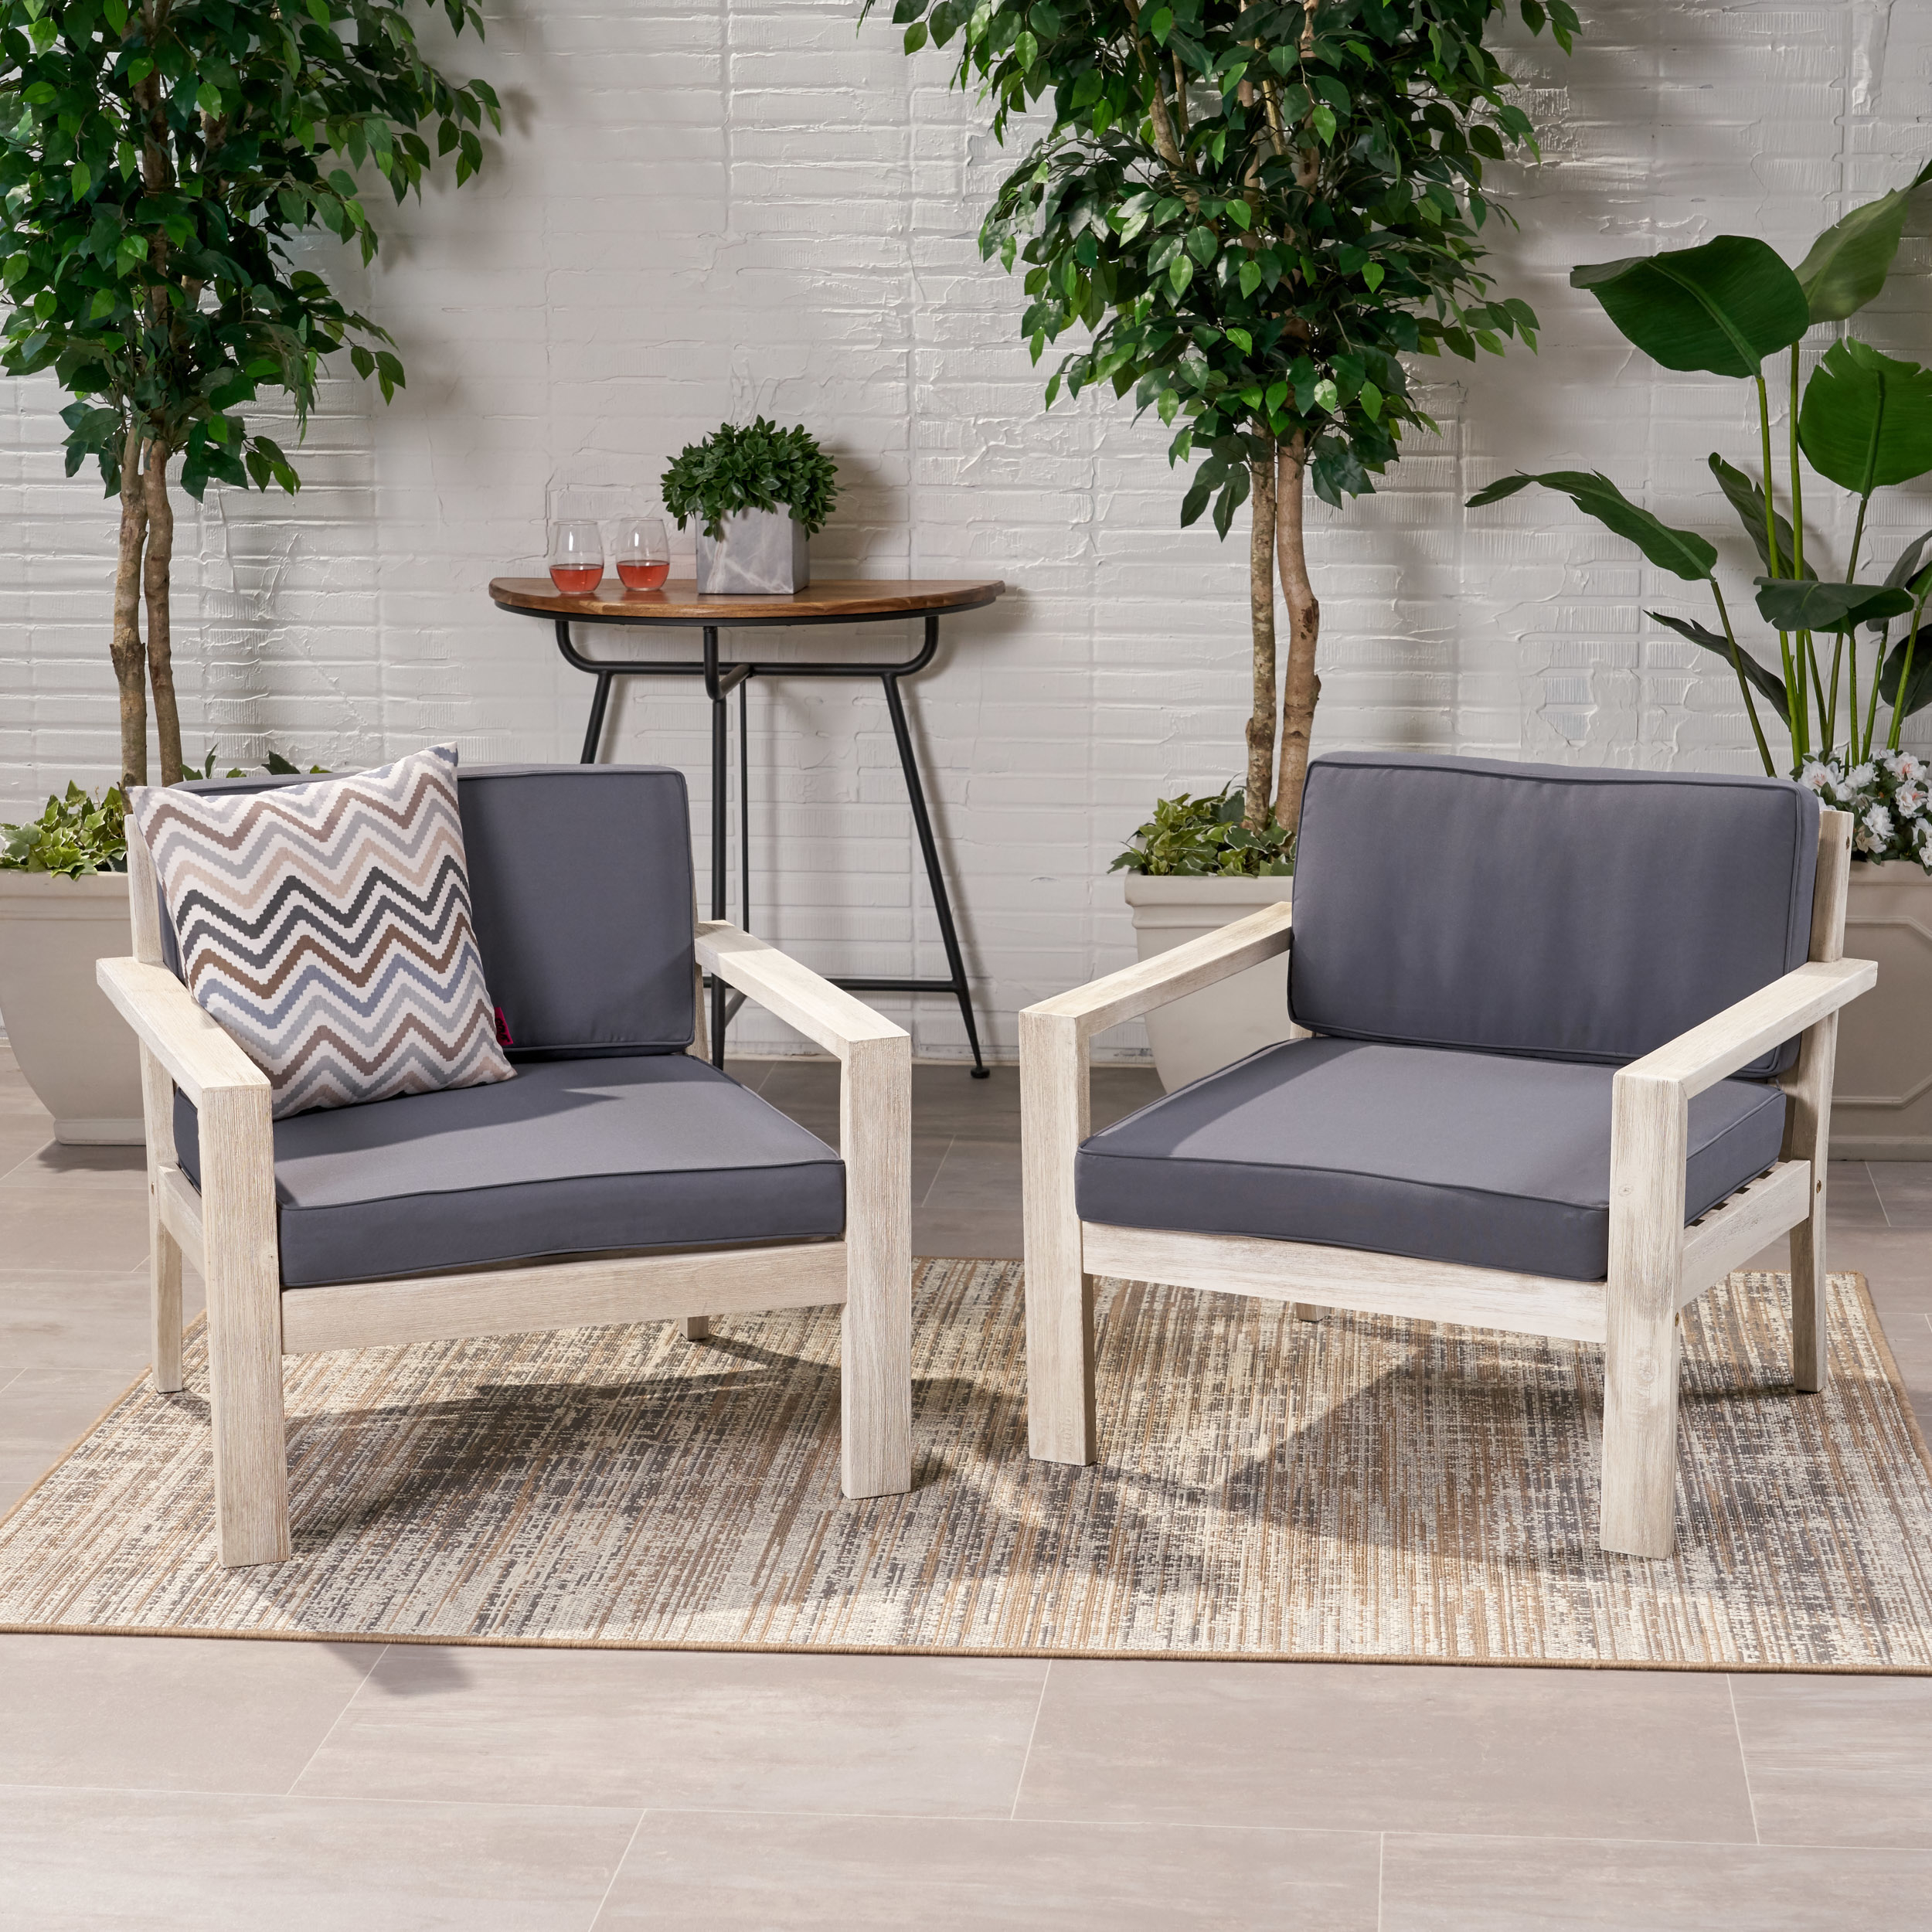 Beryl Outdoor Acacia Wood Club Chairs With Cushions (Set Of 2) - Brushed Light Gray Wash, Dark Gray